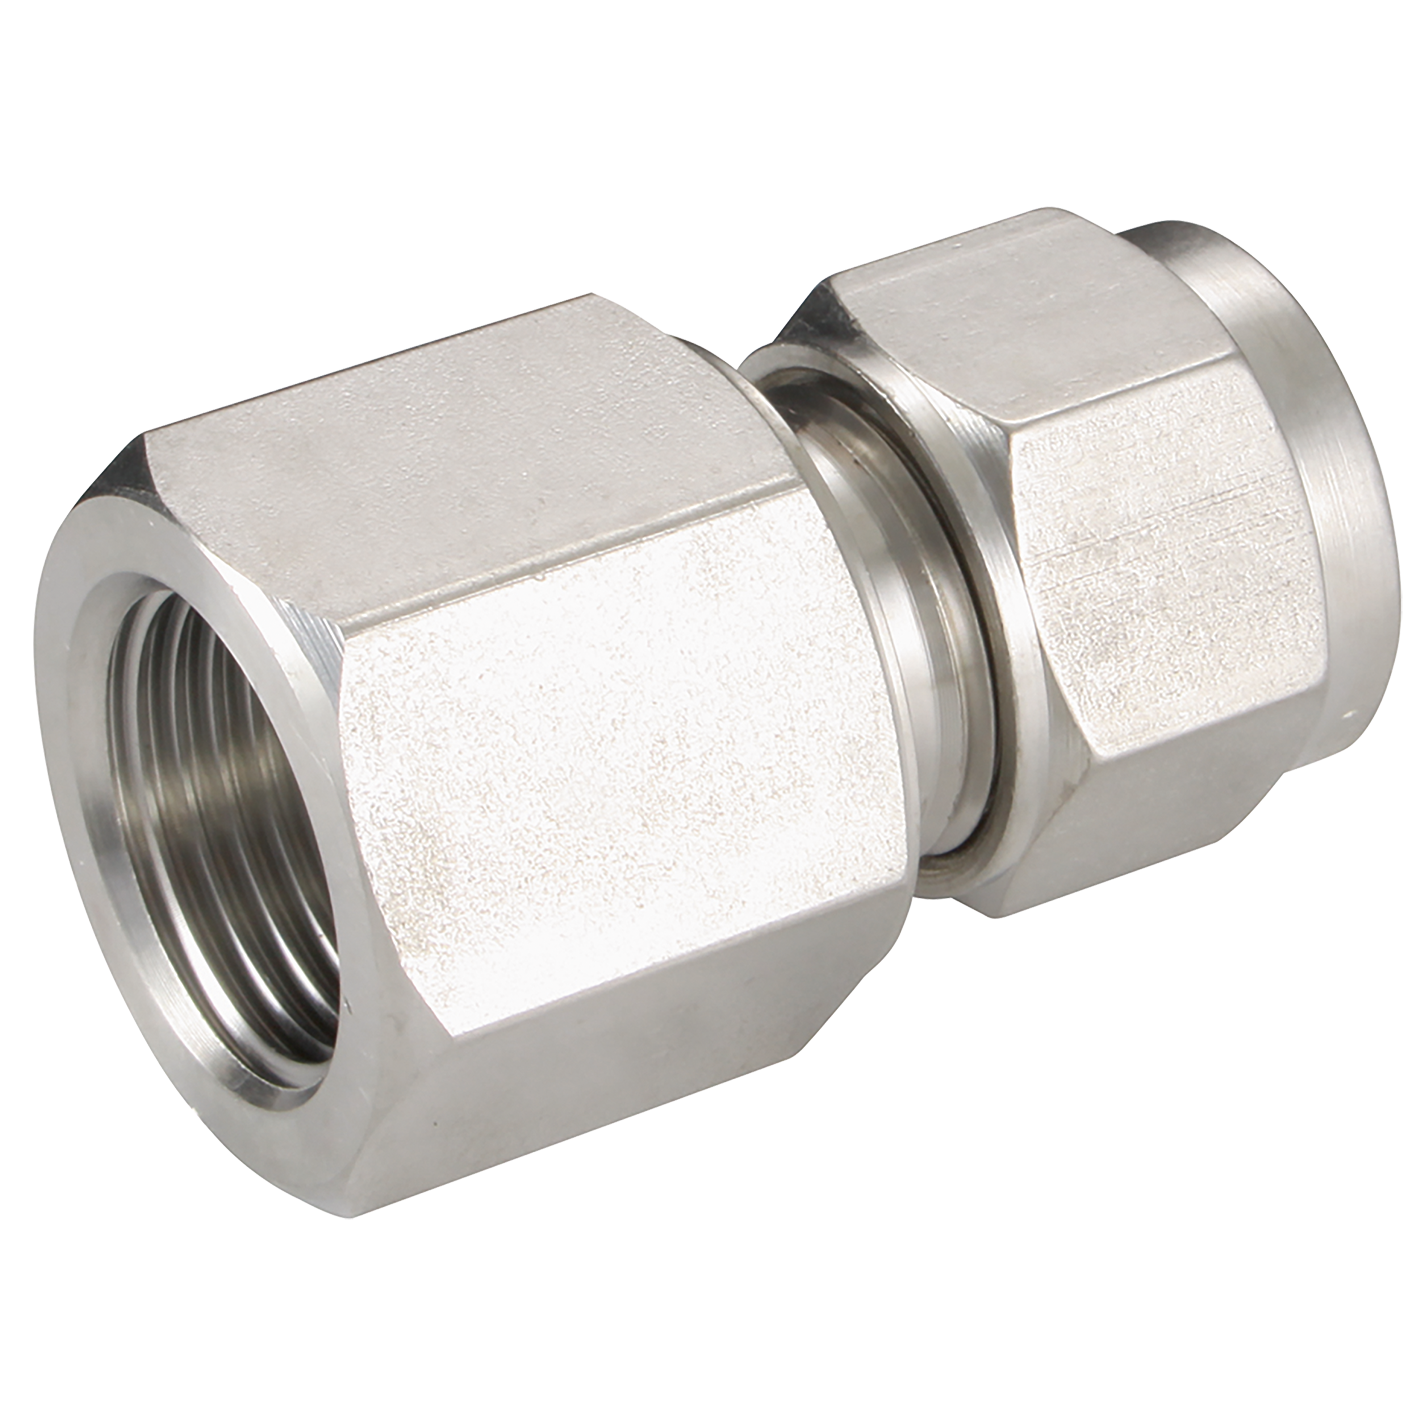 FEMALE ISO CONNECTOR 3/8 OD 1/2 BSPT